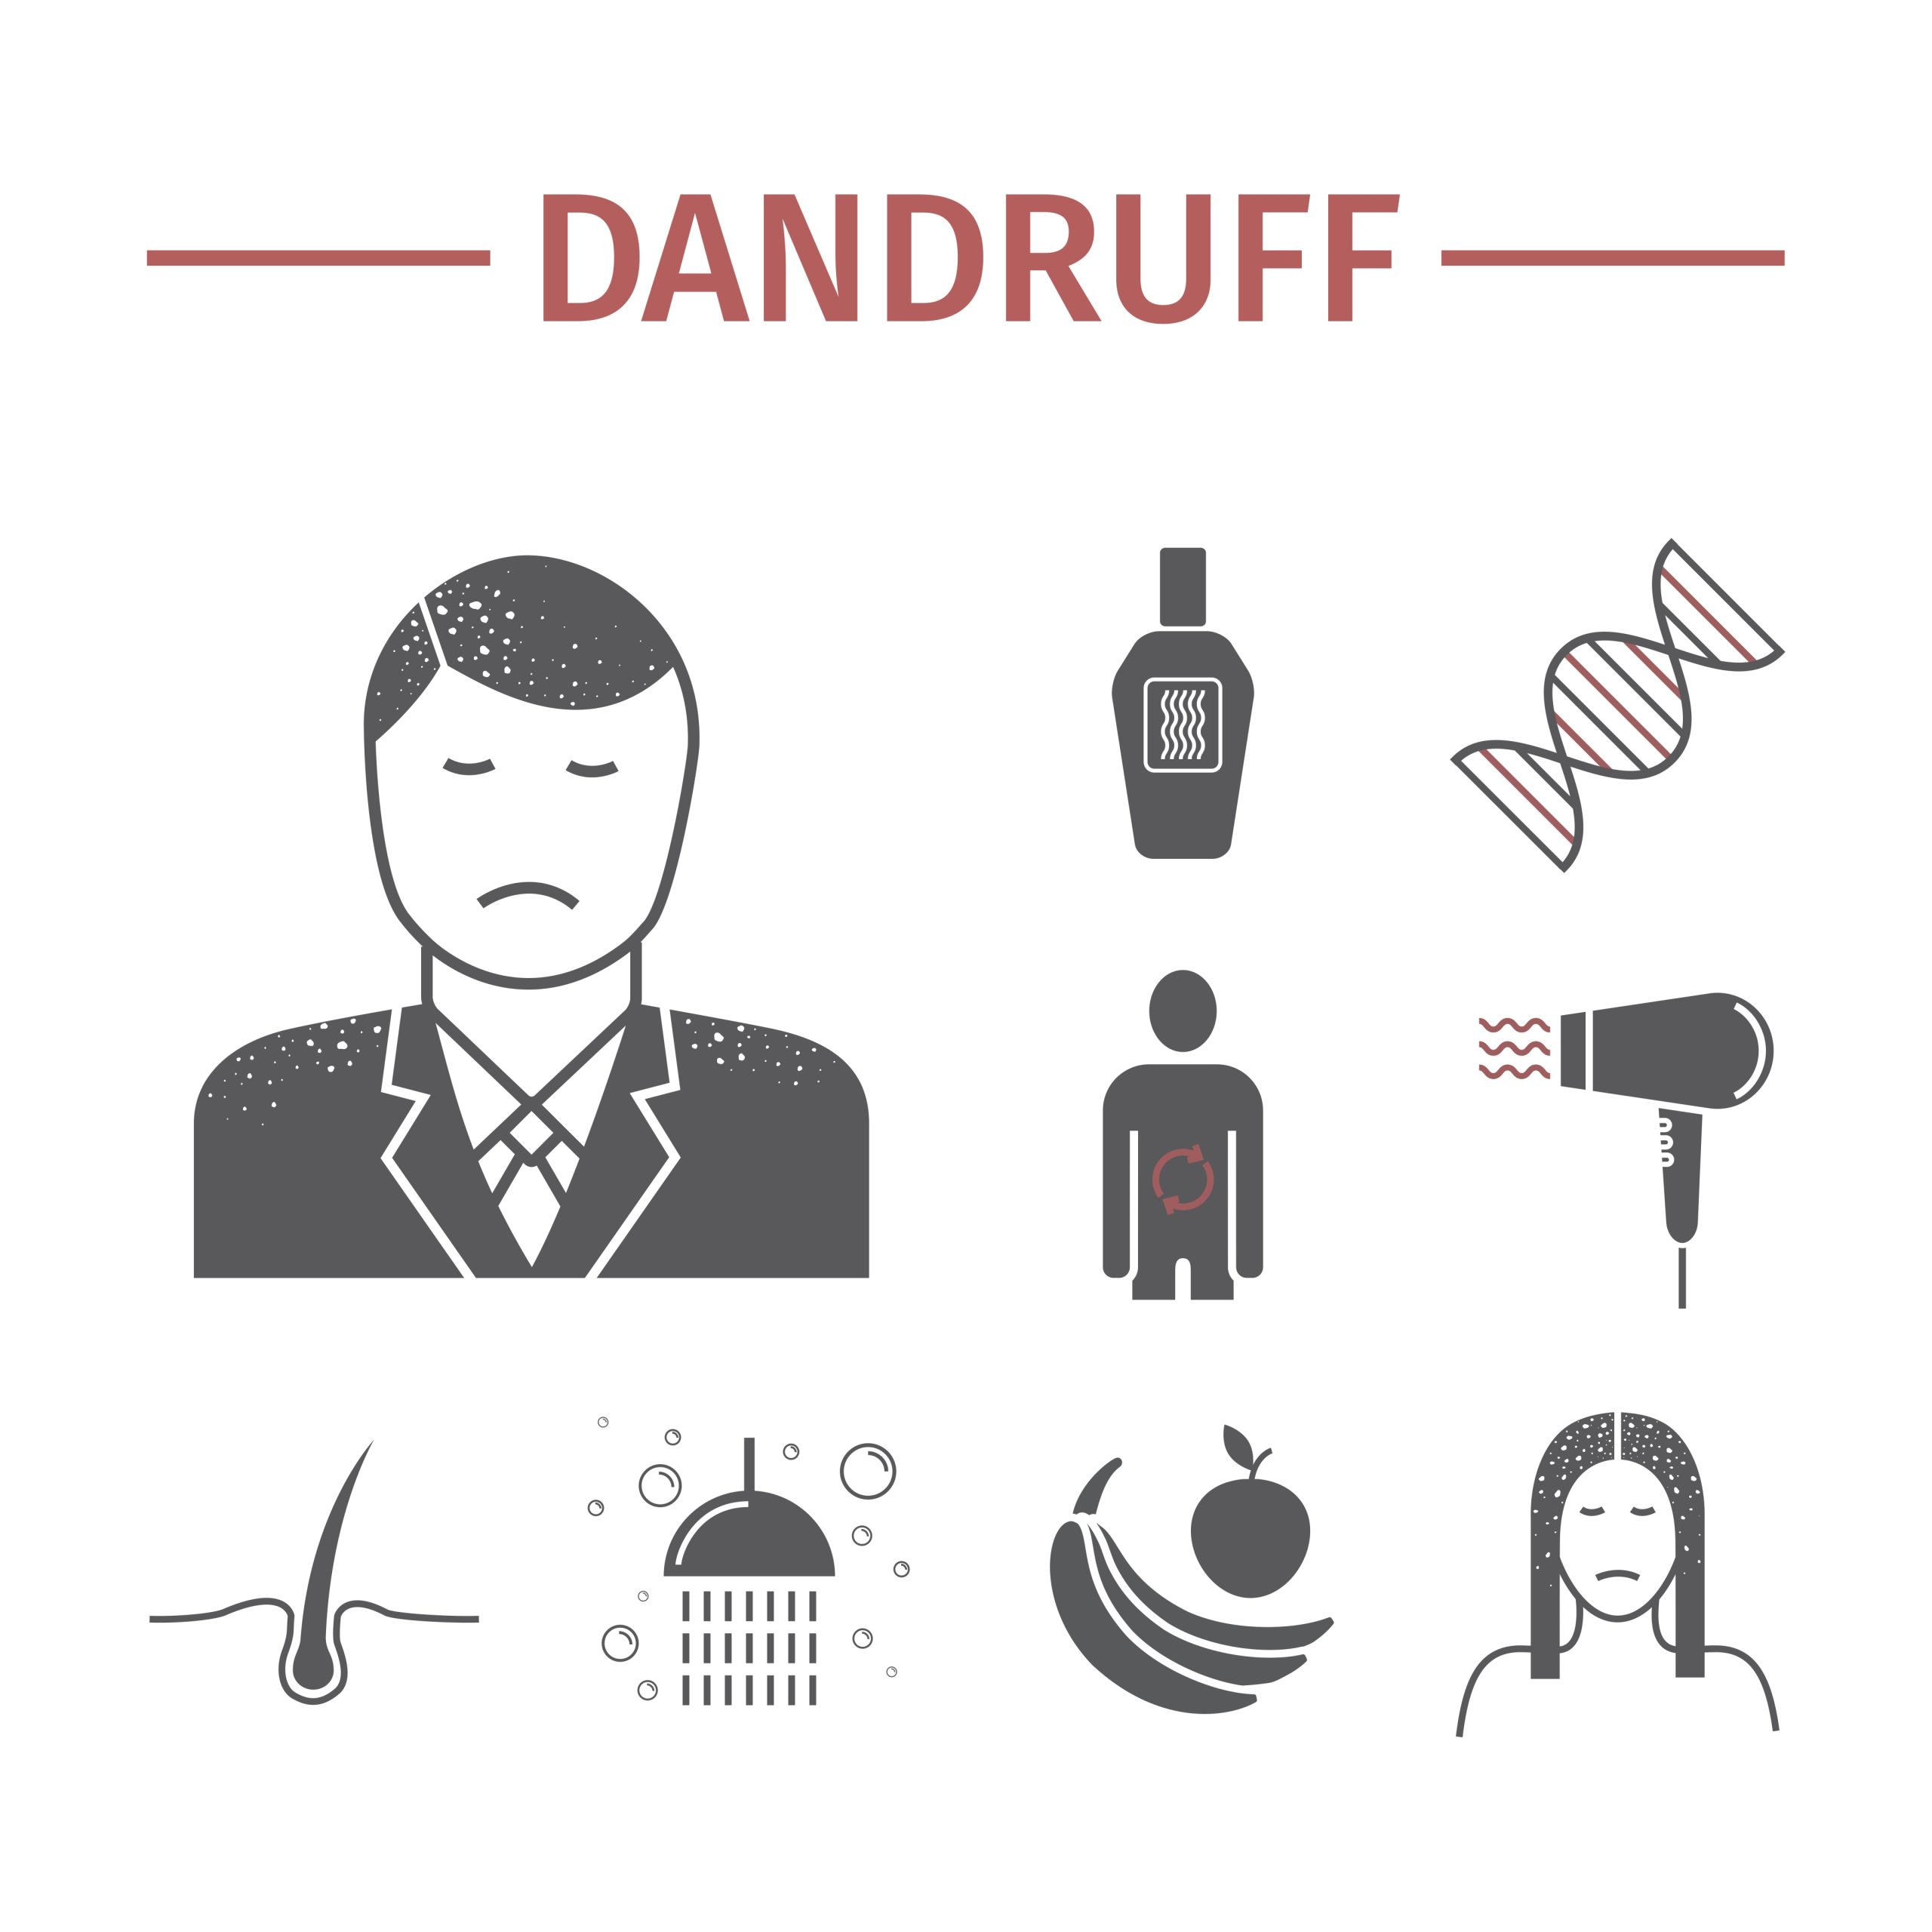 causes-of-dandruff-how-to-get-rid-of-dandruff-man-for-himself